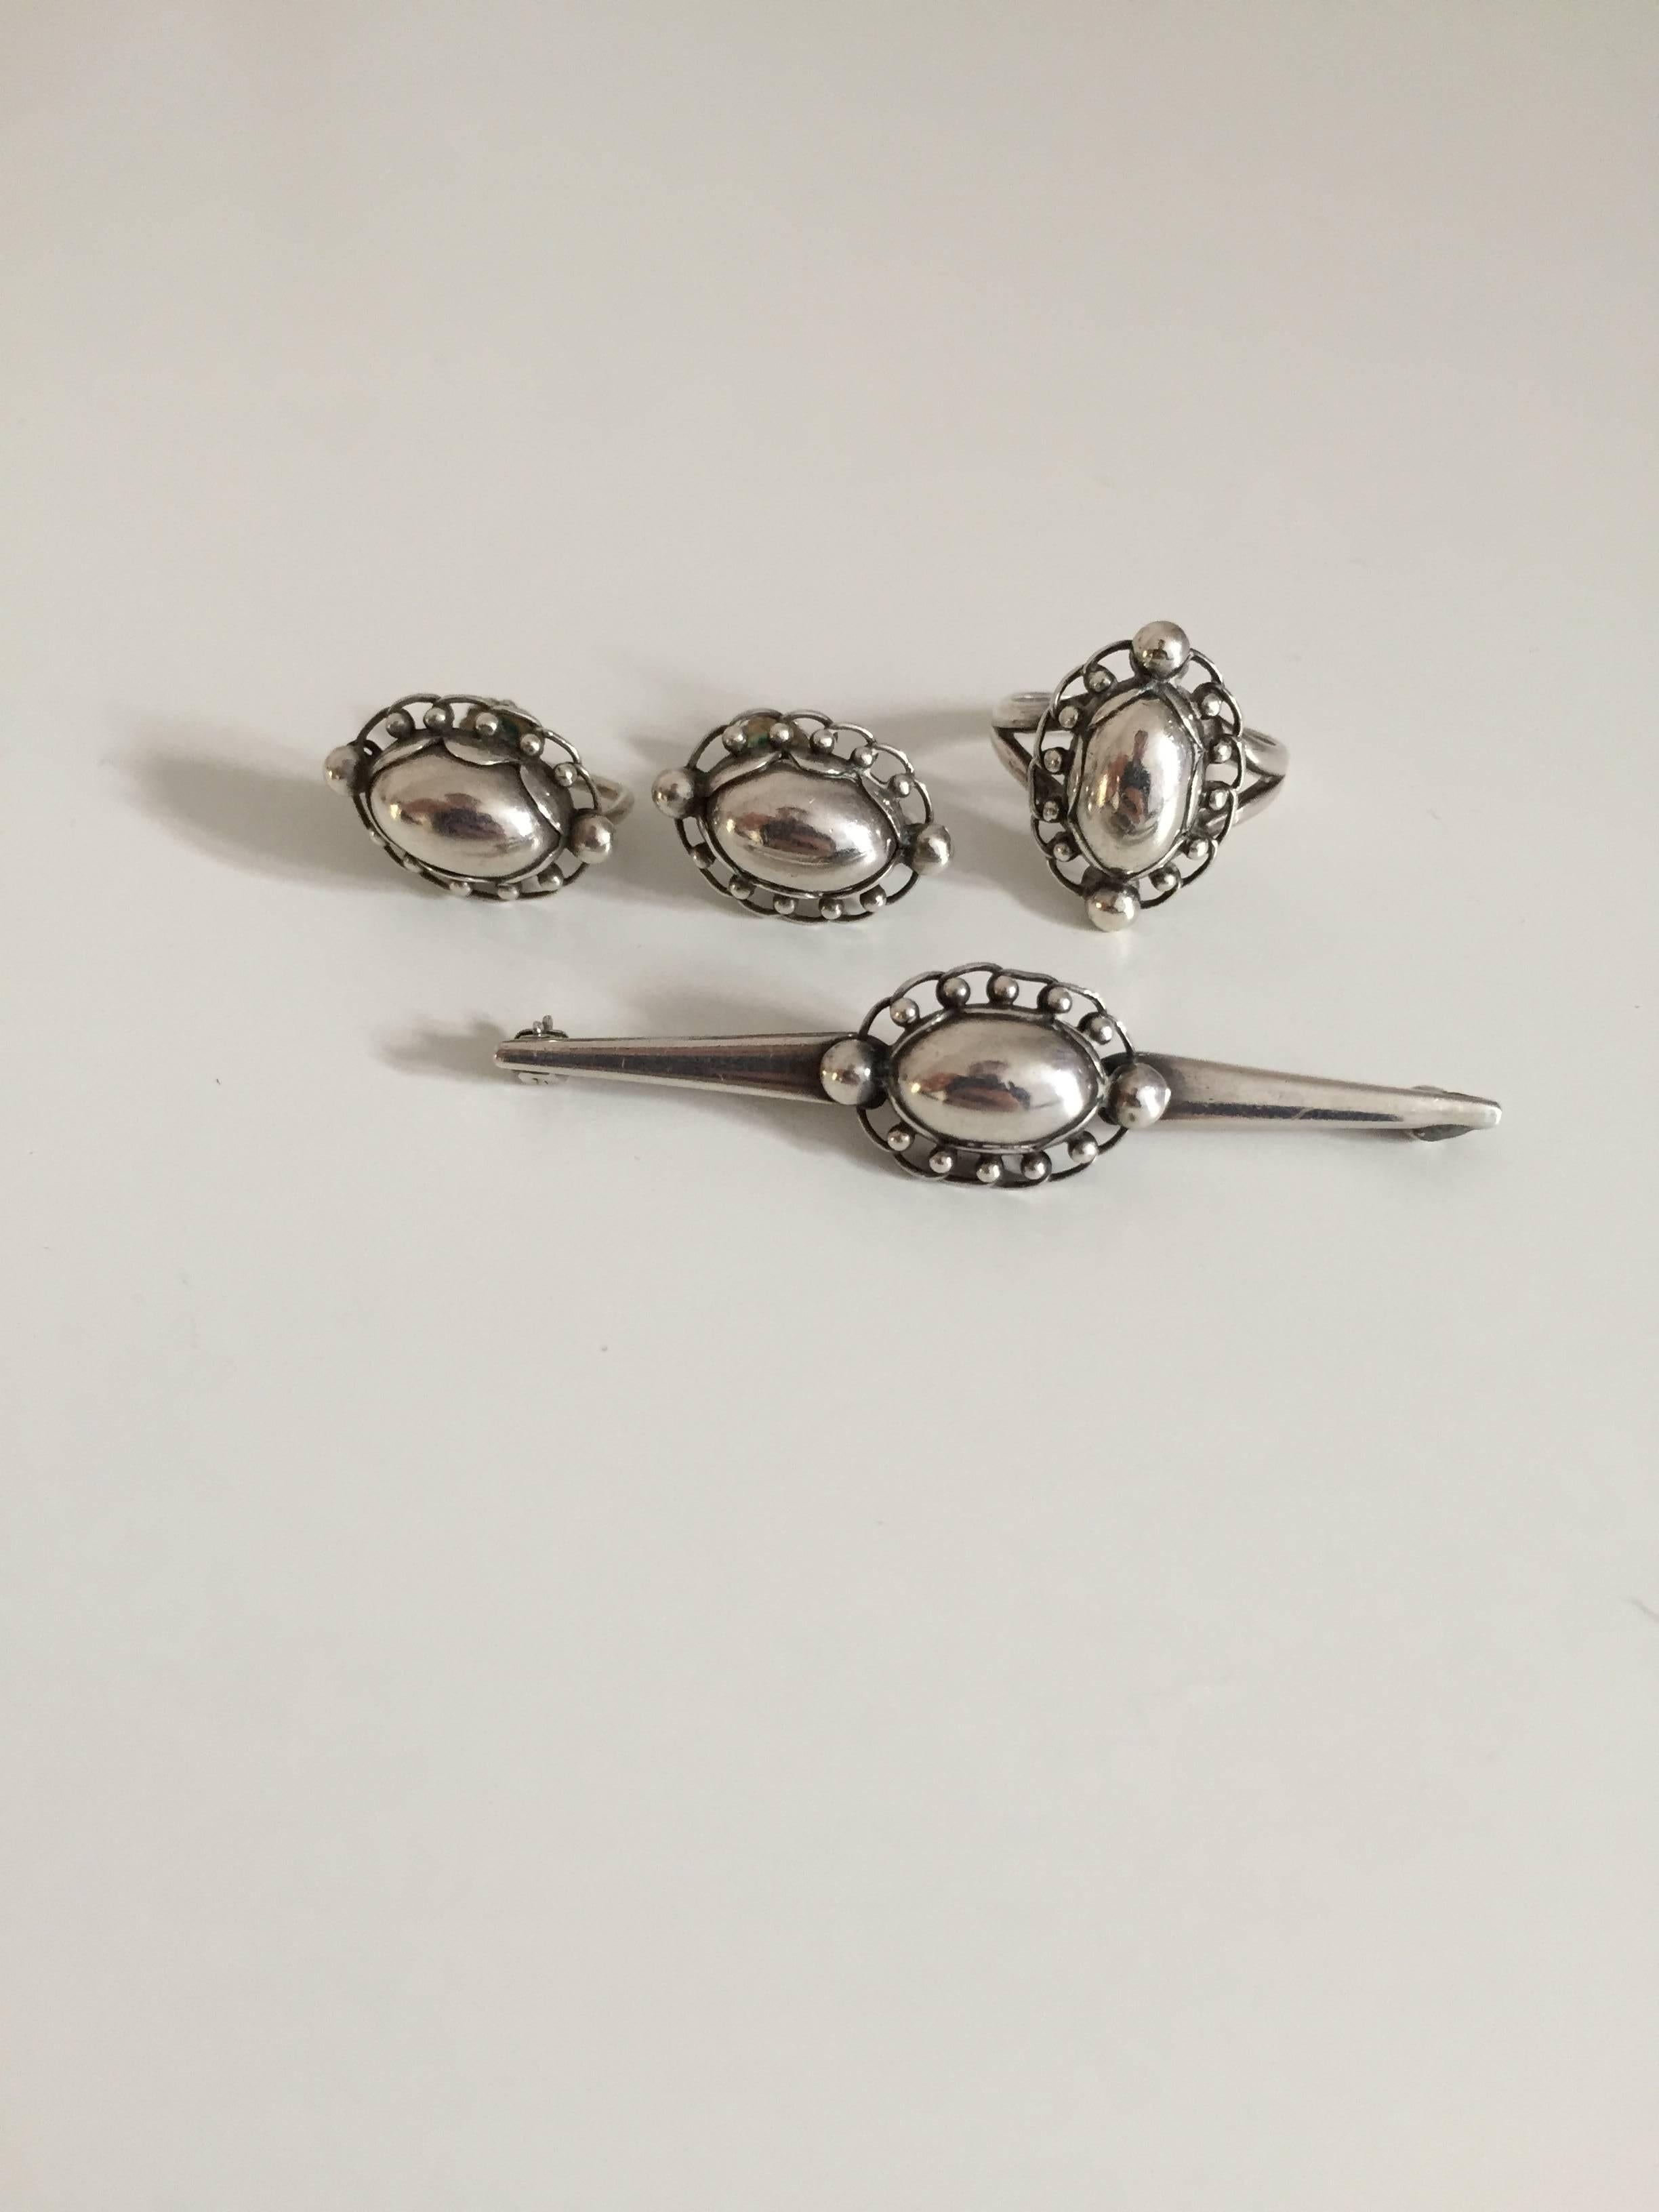 Georg Jensen sterling silver jewelry set of ring #21, brooch 195 and earclips #81.

Measurements: Ring size 55 1/2. Brooch 6.1 cm L. Earclips 2 cm x 1.1 cm.